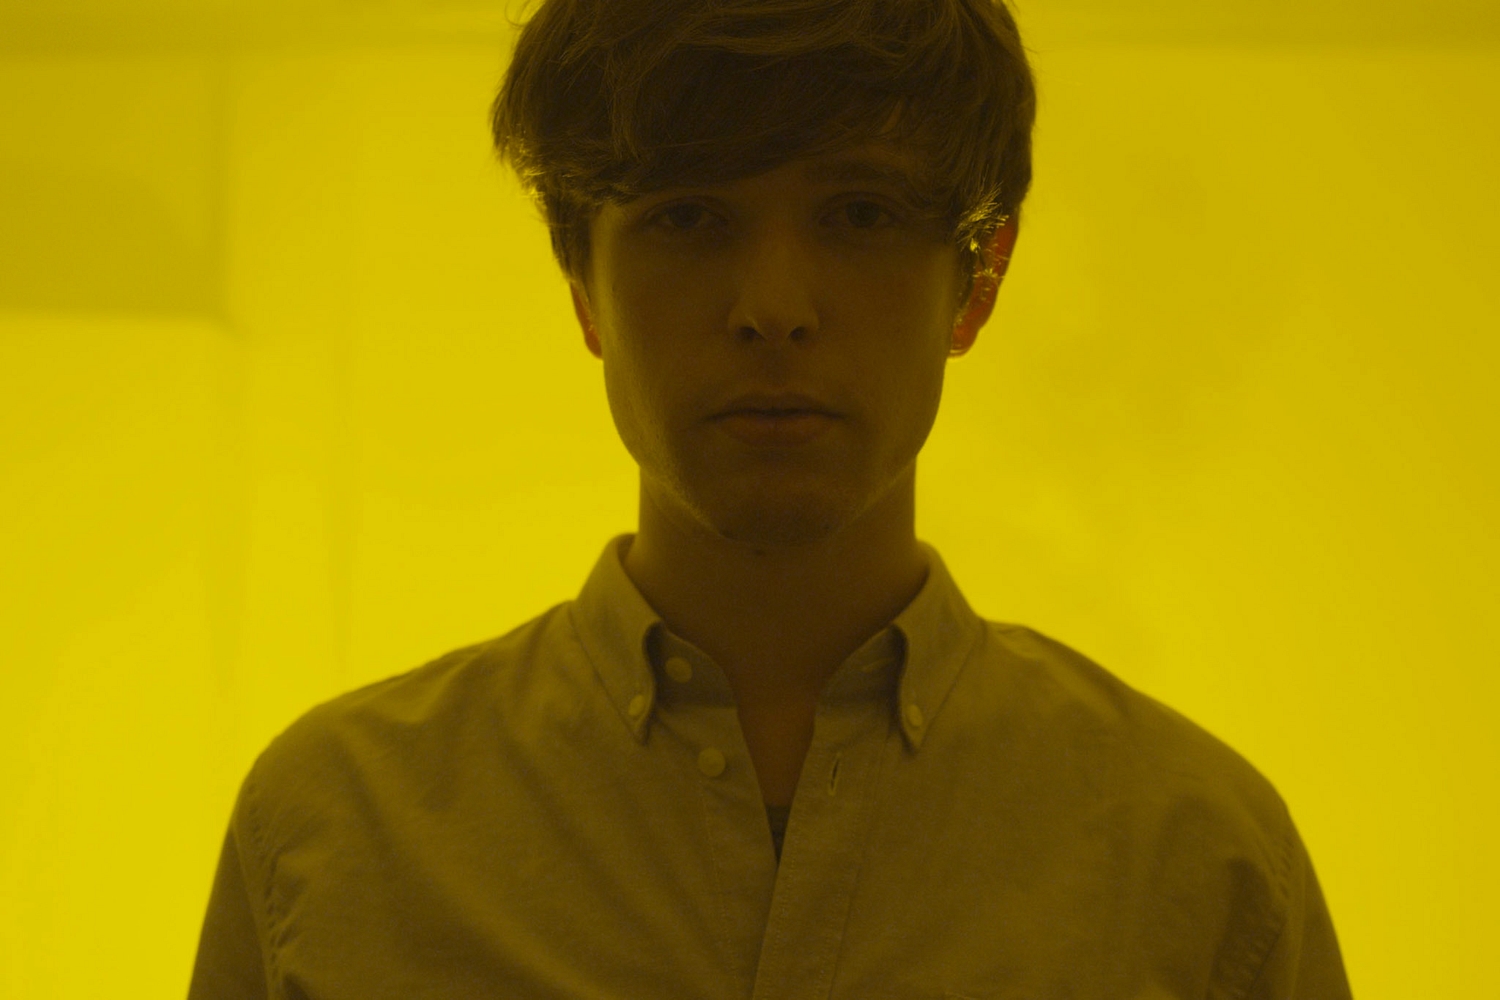 James Blake breaking his 'Radio Silence' is set to be one of 2016's defining moments